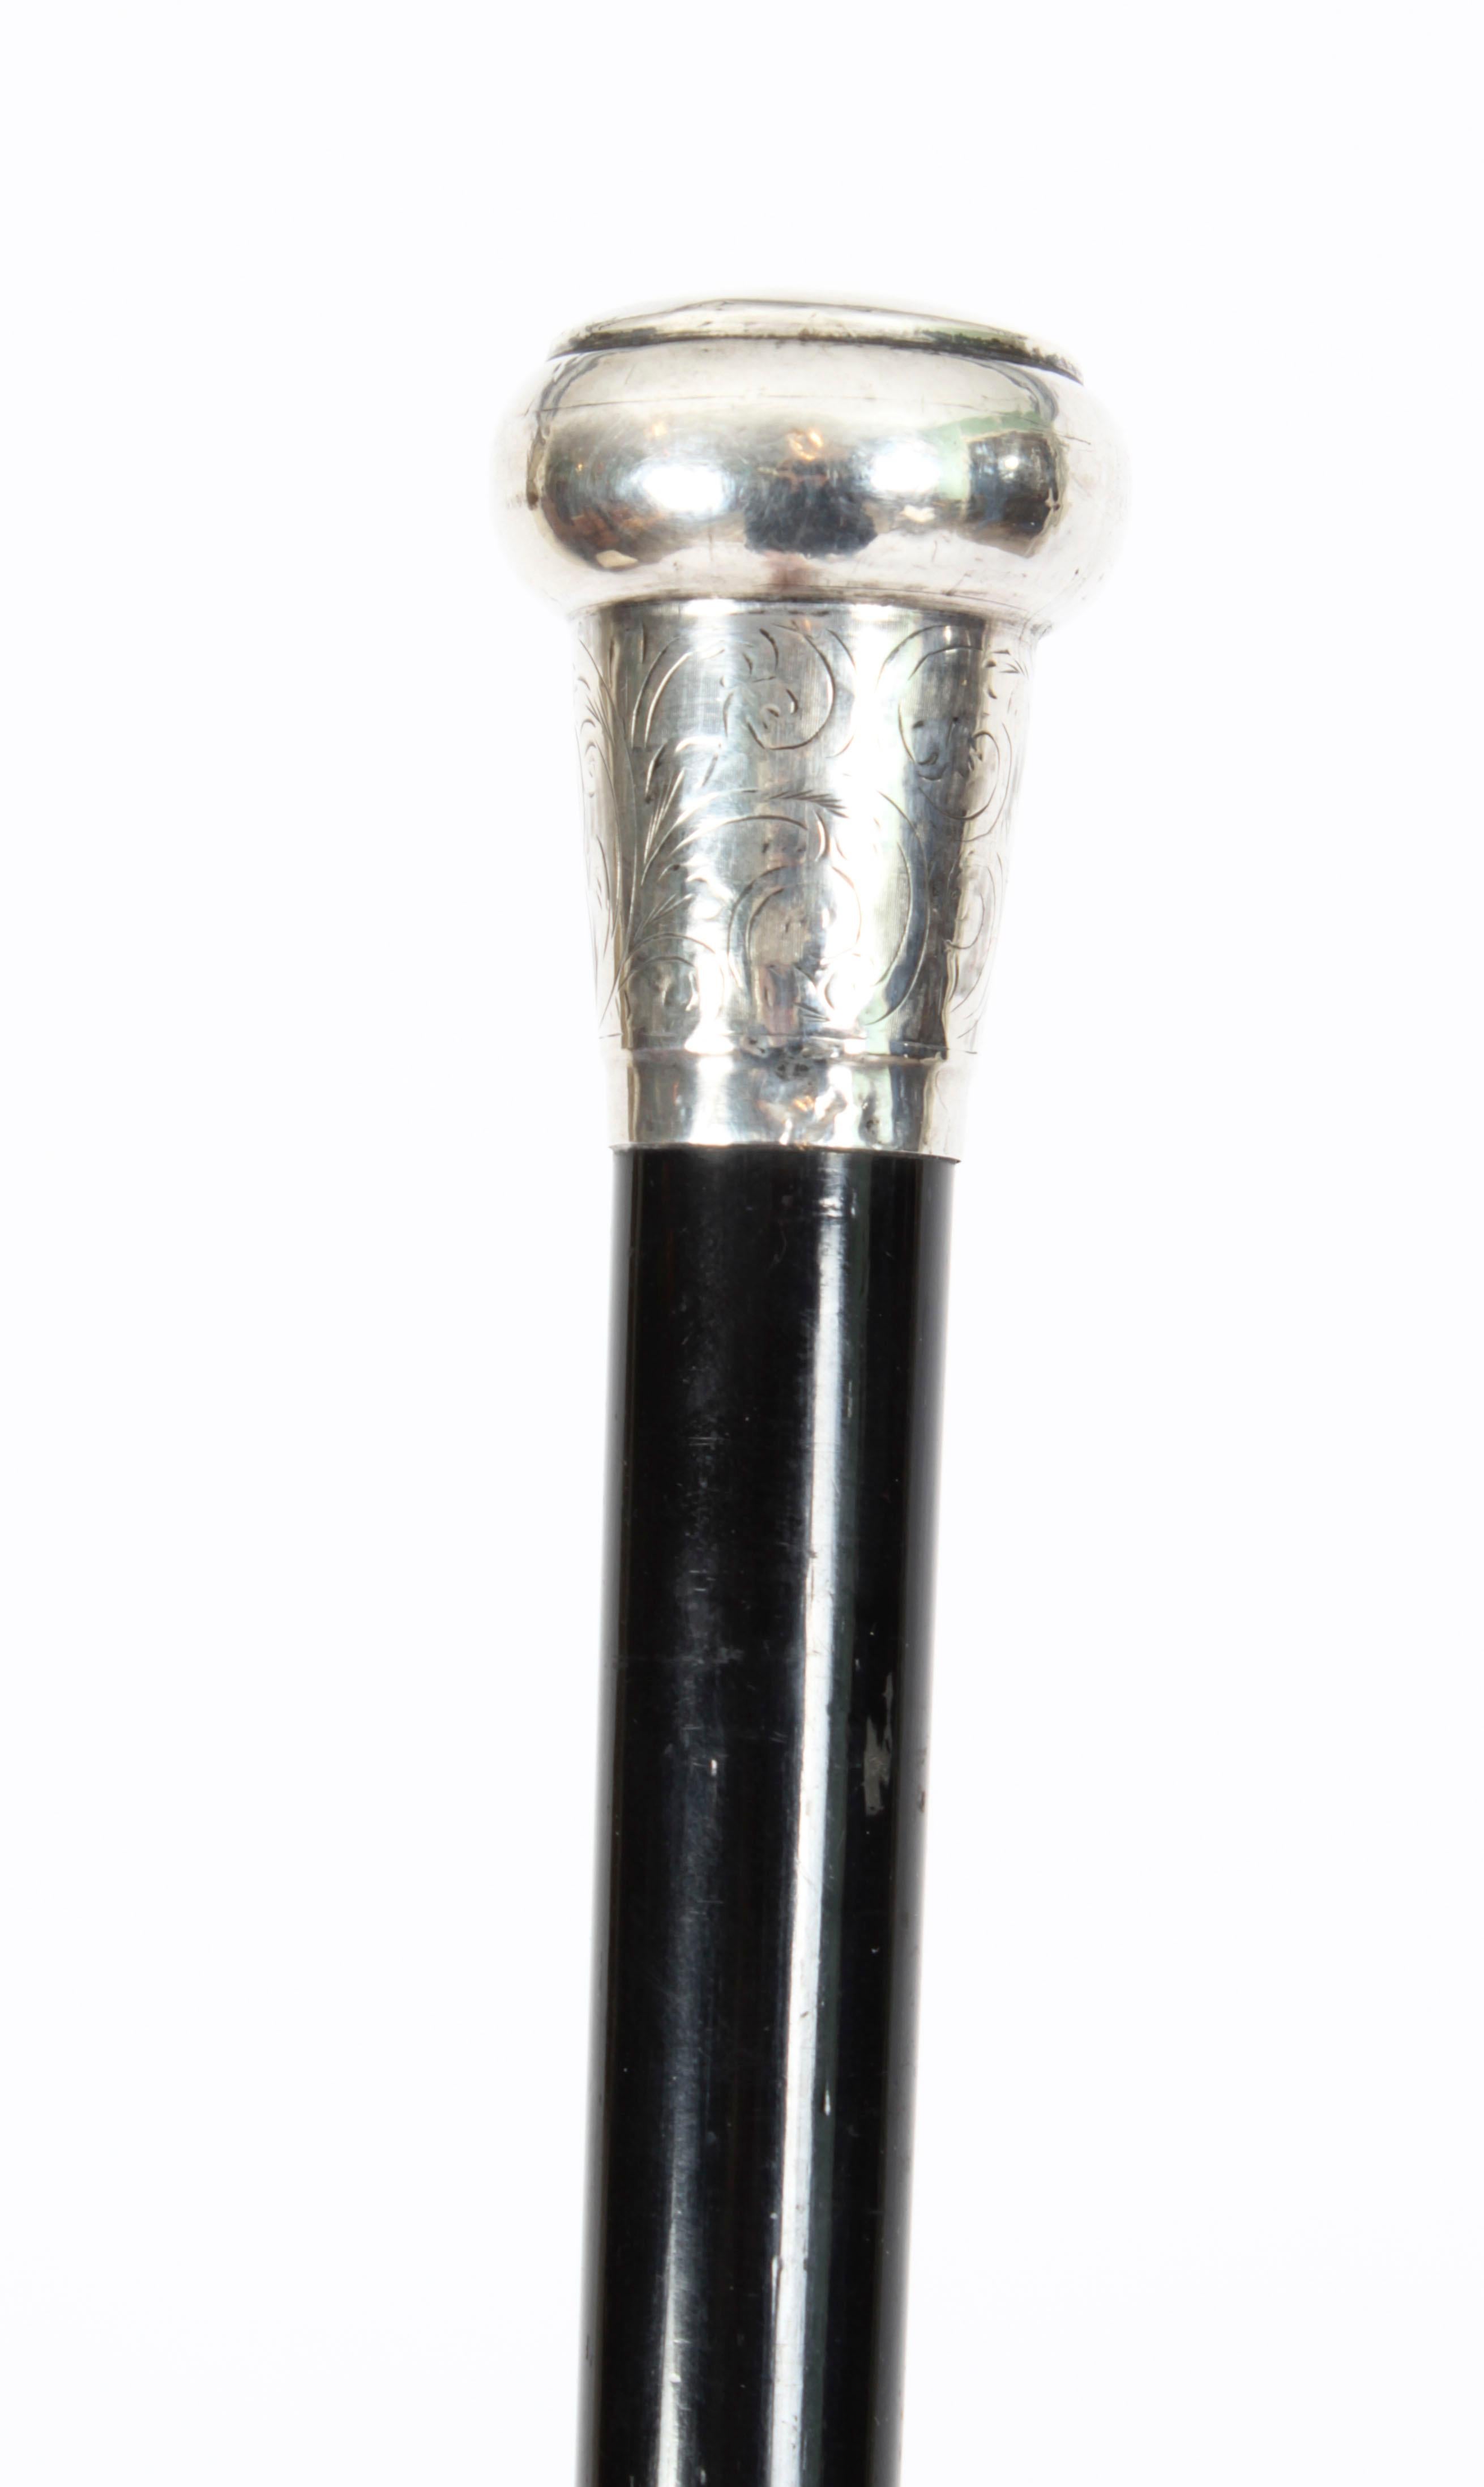 This is a beautiful antique Edwardian sterling silver pommel and ebonised shaft walking stick with hallmarks for London, mae by by Alfred Clarke, dated 1904.
 
This decorative walking cane features an exquisite cast silver pommel with engraved